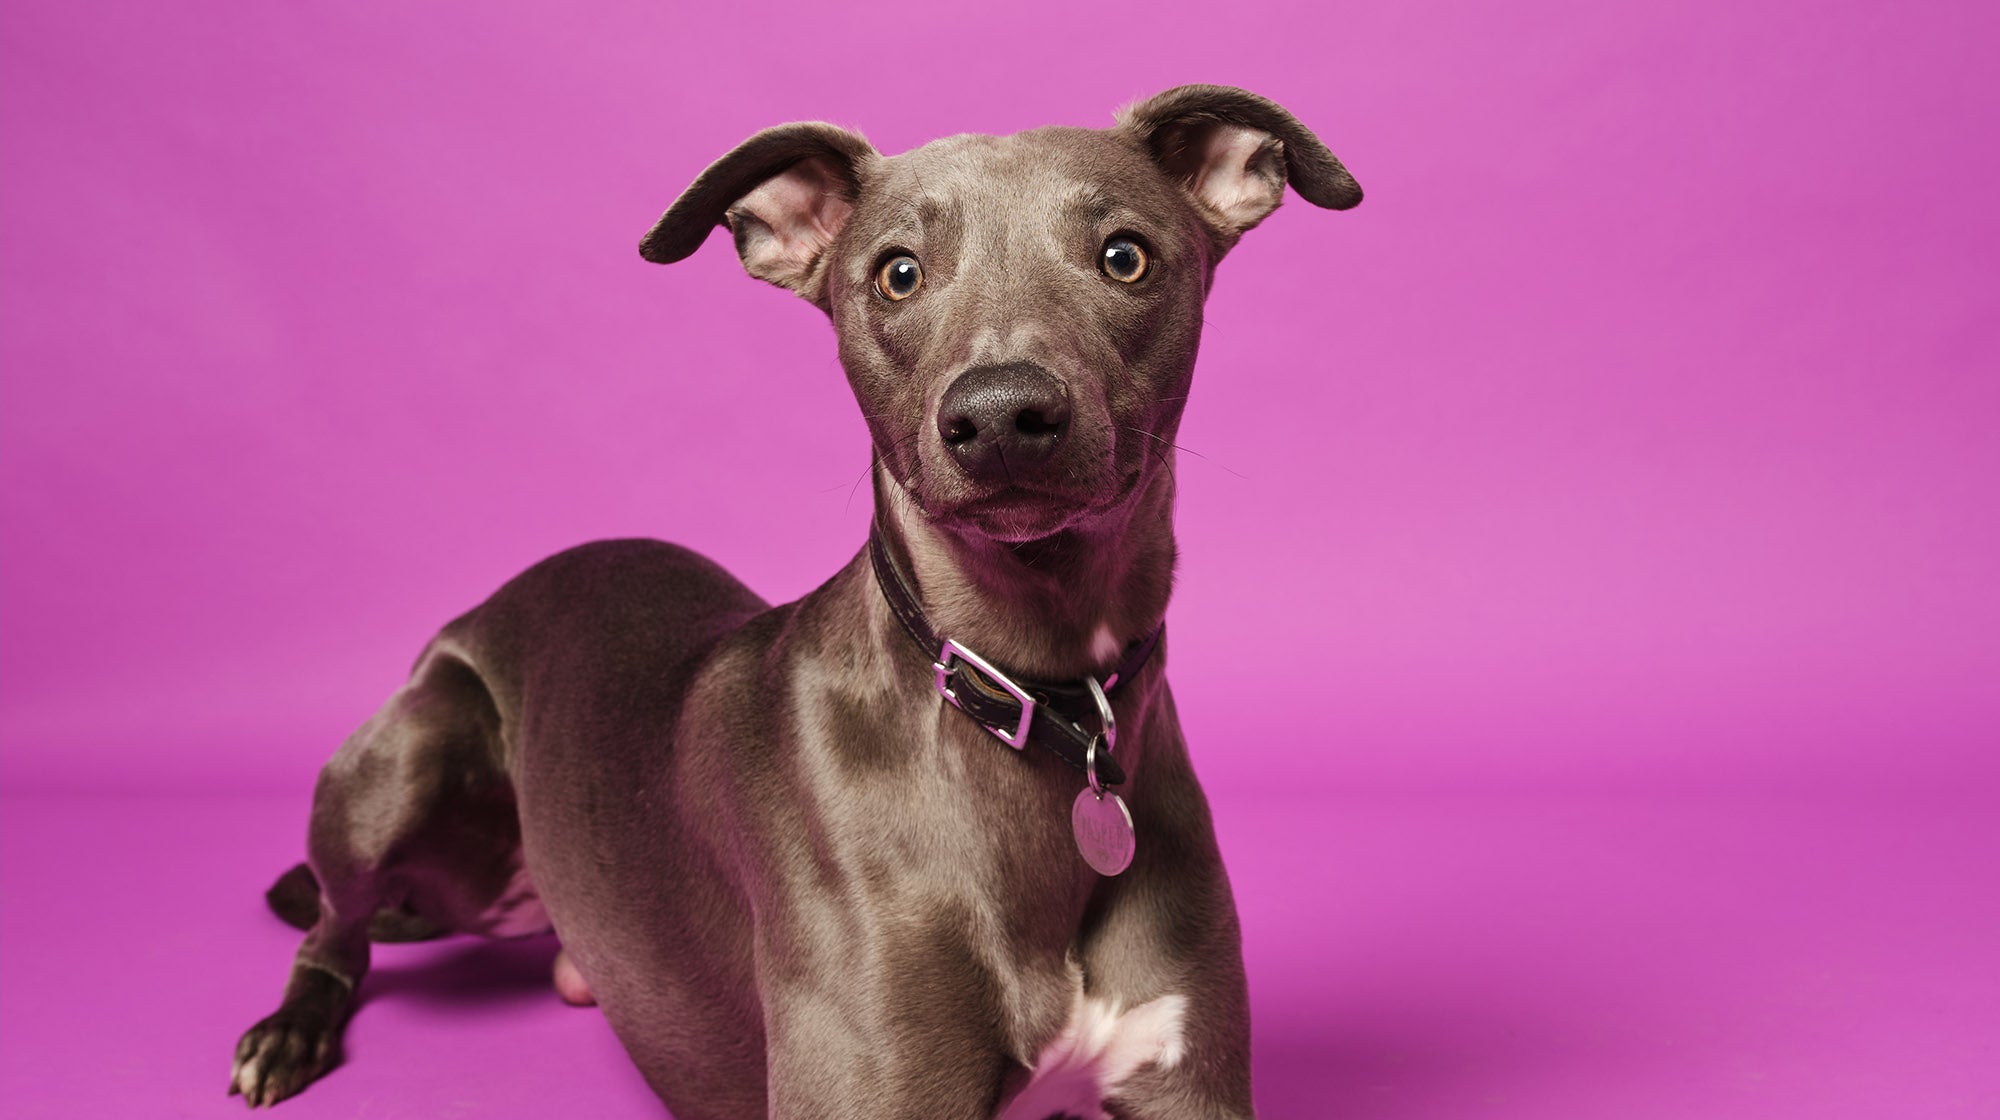 A brown dog lay down calmly on a purple background